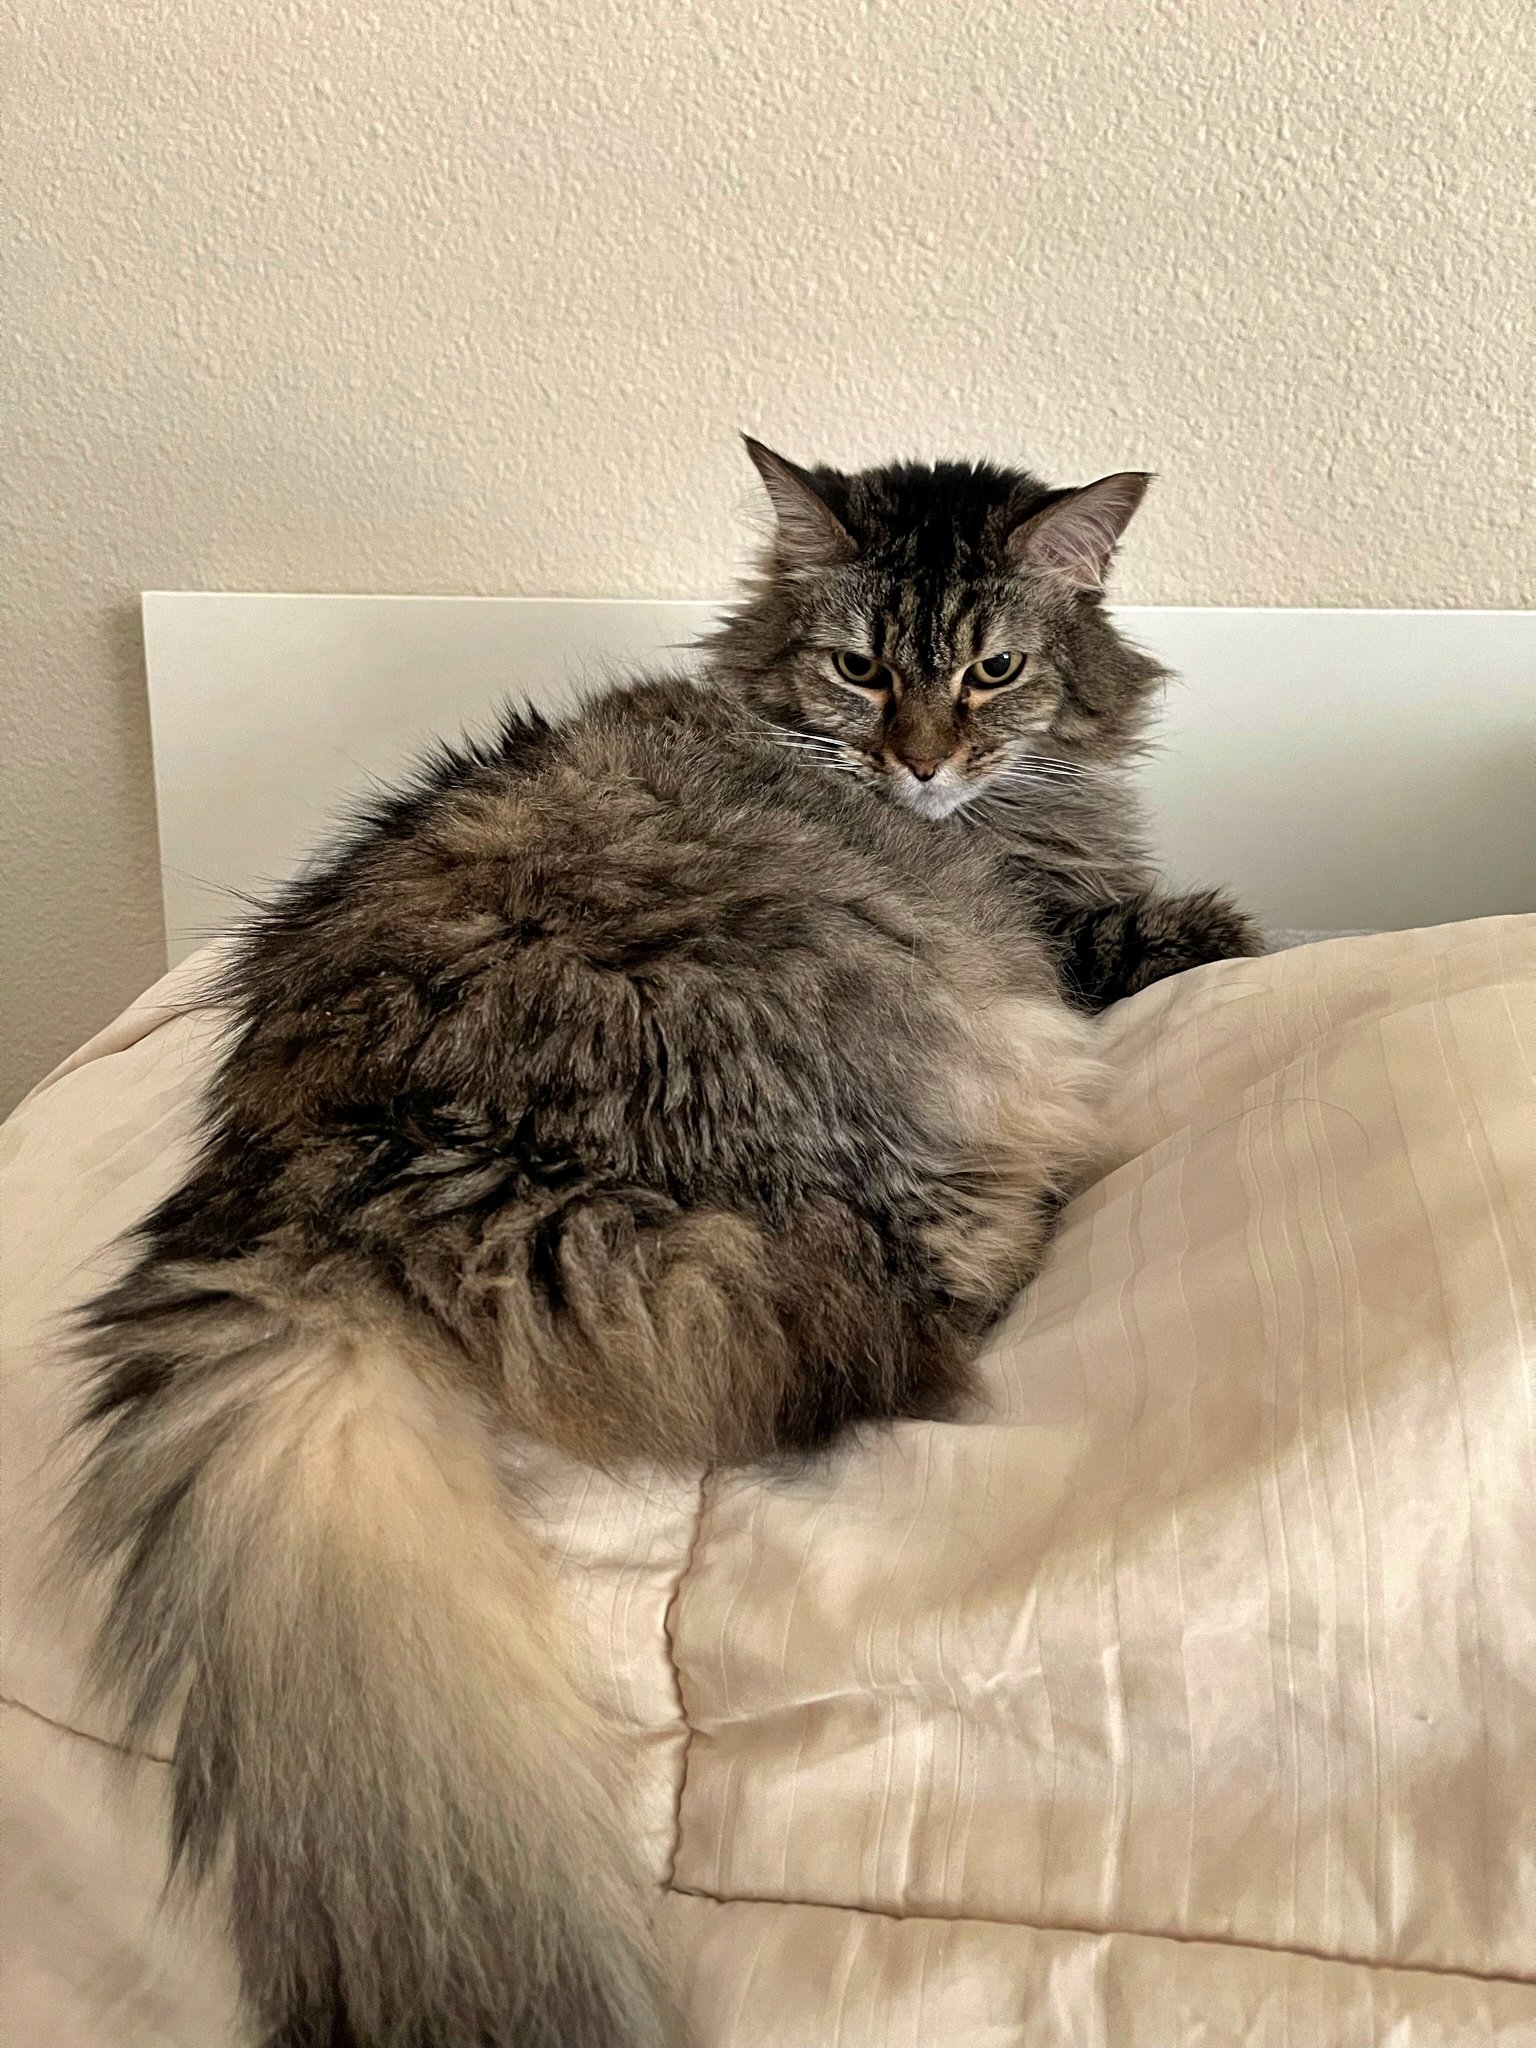 MILO (F)- Offered by Owner - Female Maine Coon Mix